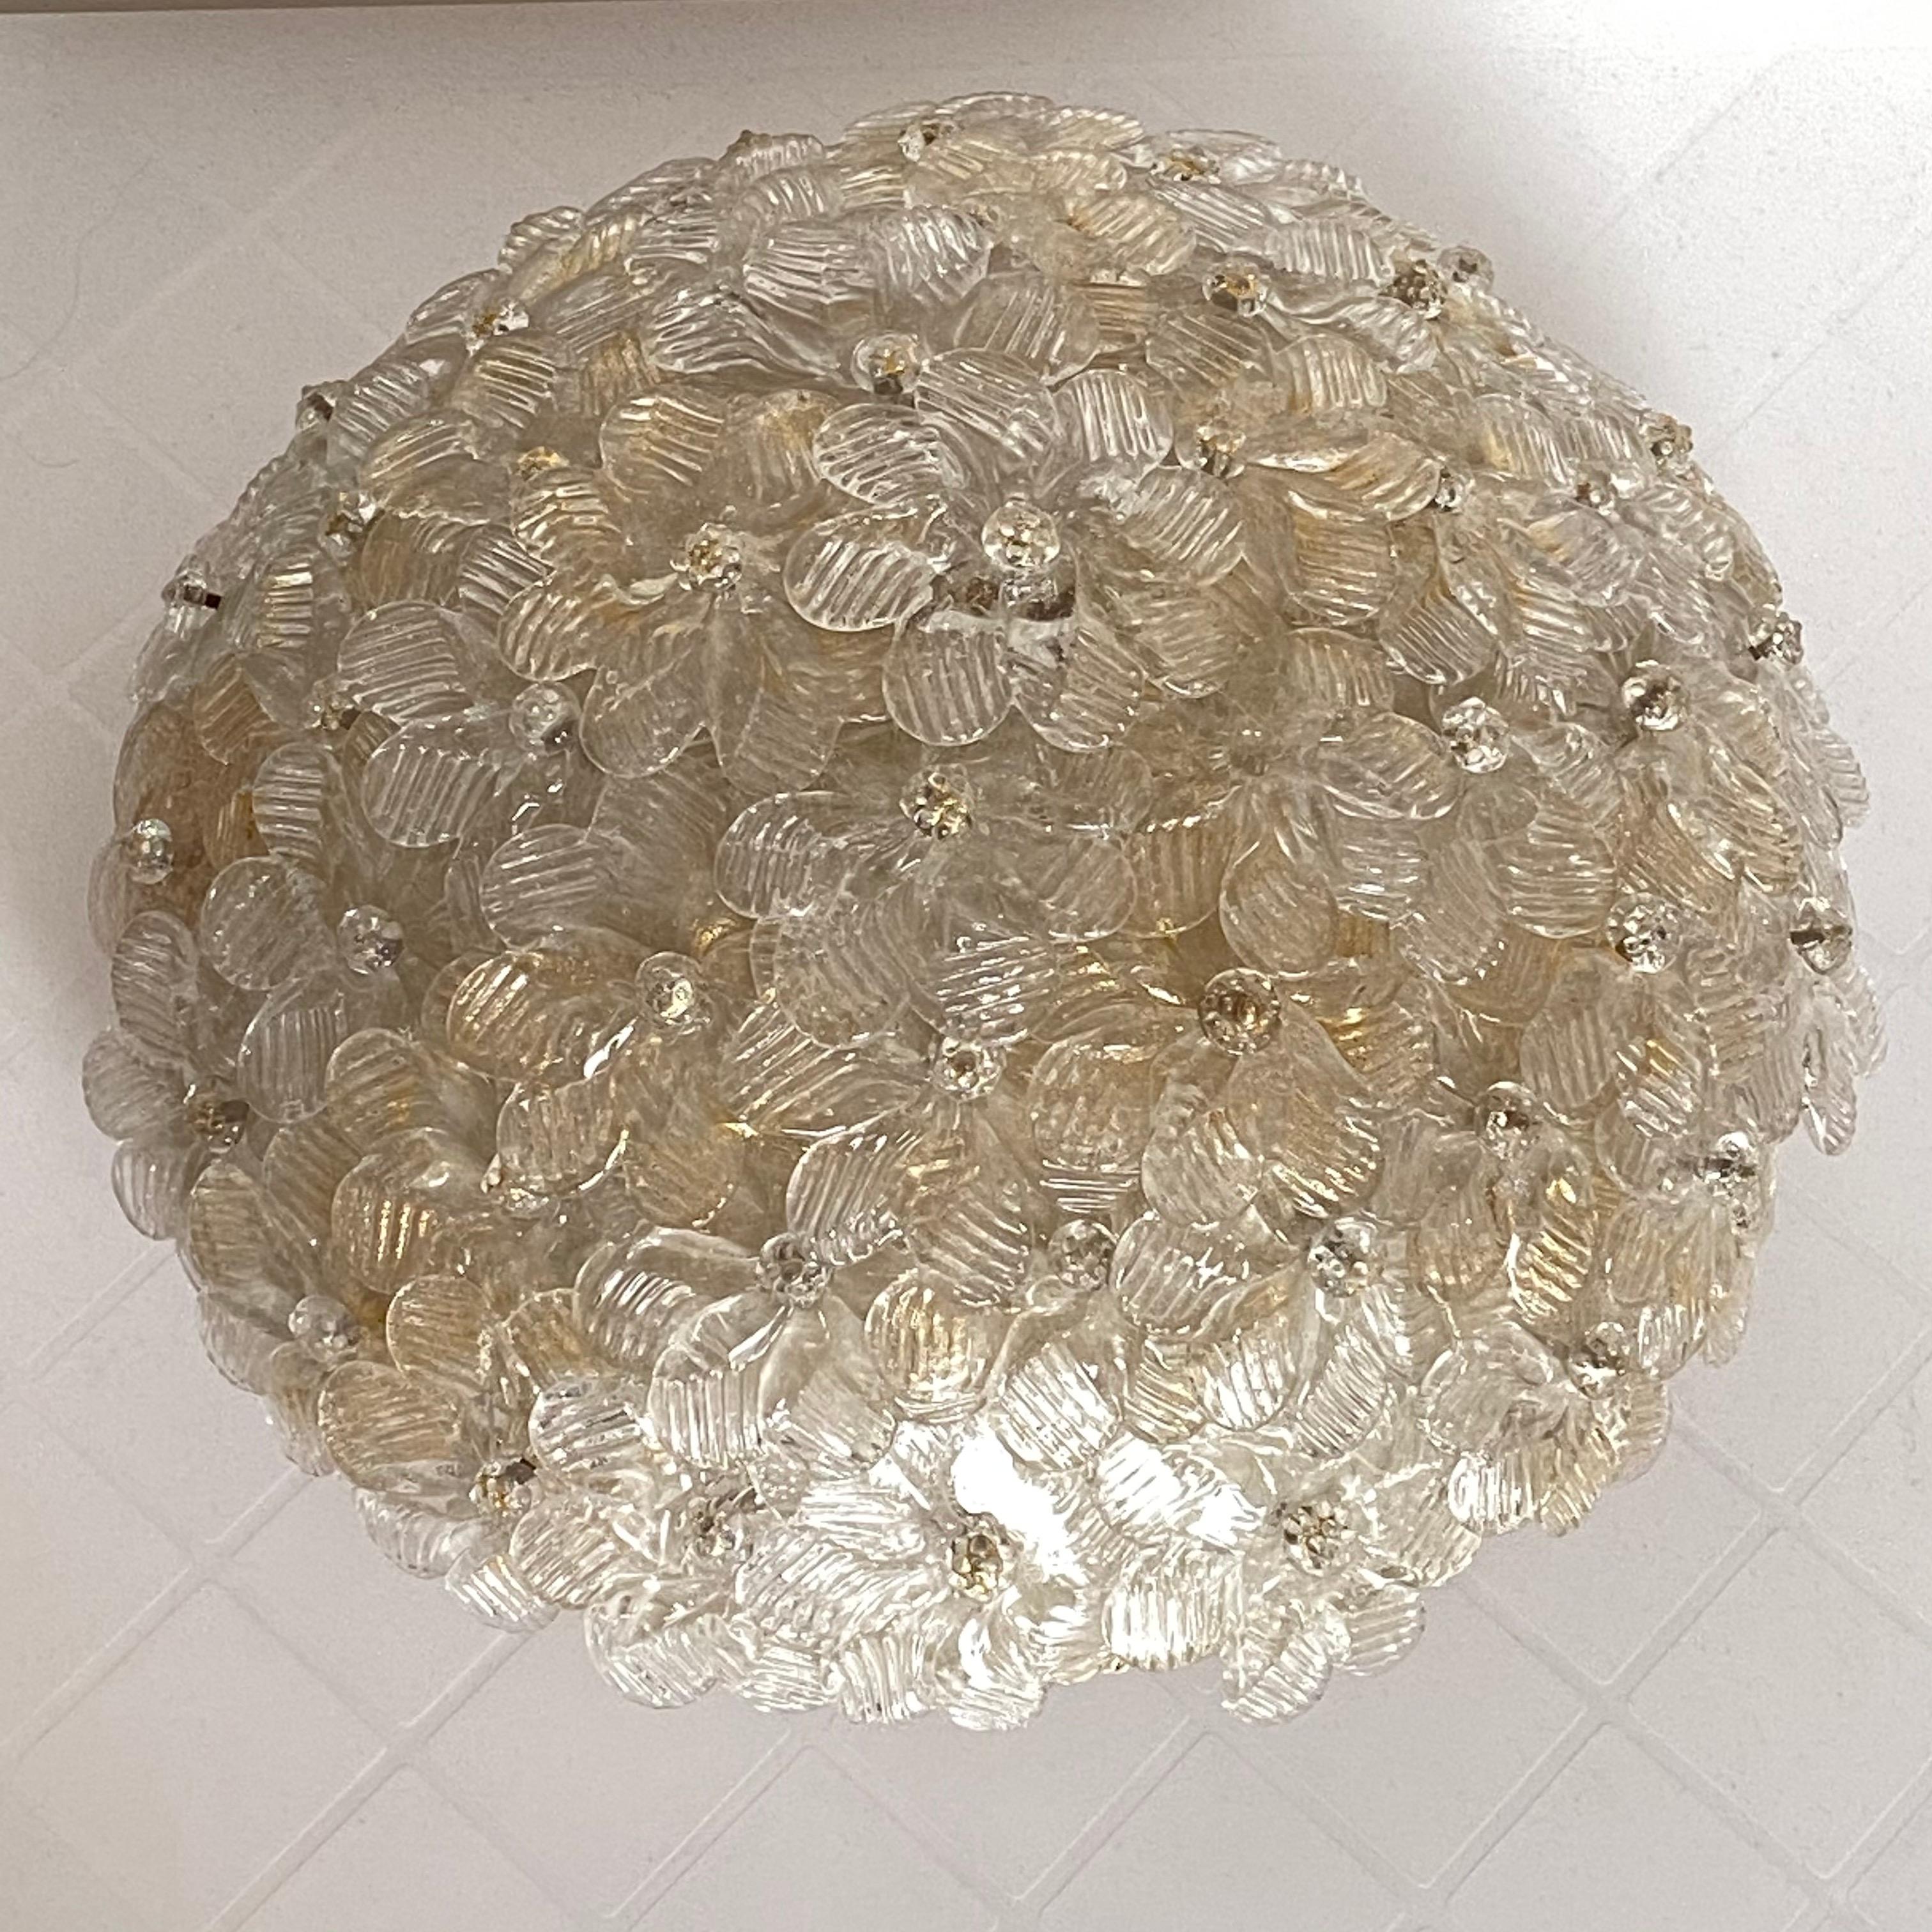 A hand blown Italian flush mount chandelier featuring overlapping crystal flowers, gold with 23-carat gold leaf fleck inclusions, mounted on a basket frame. The fixture requires three European E14 / 110 volt candelabra bulbs, each bulb up to 60